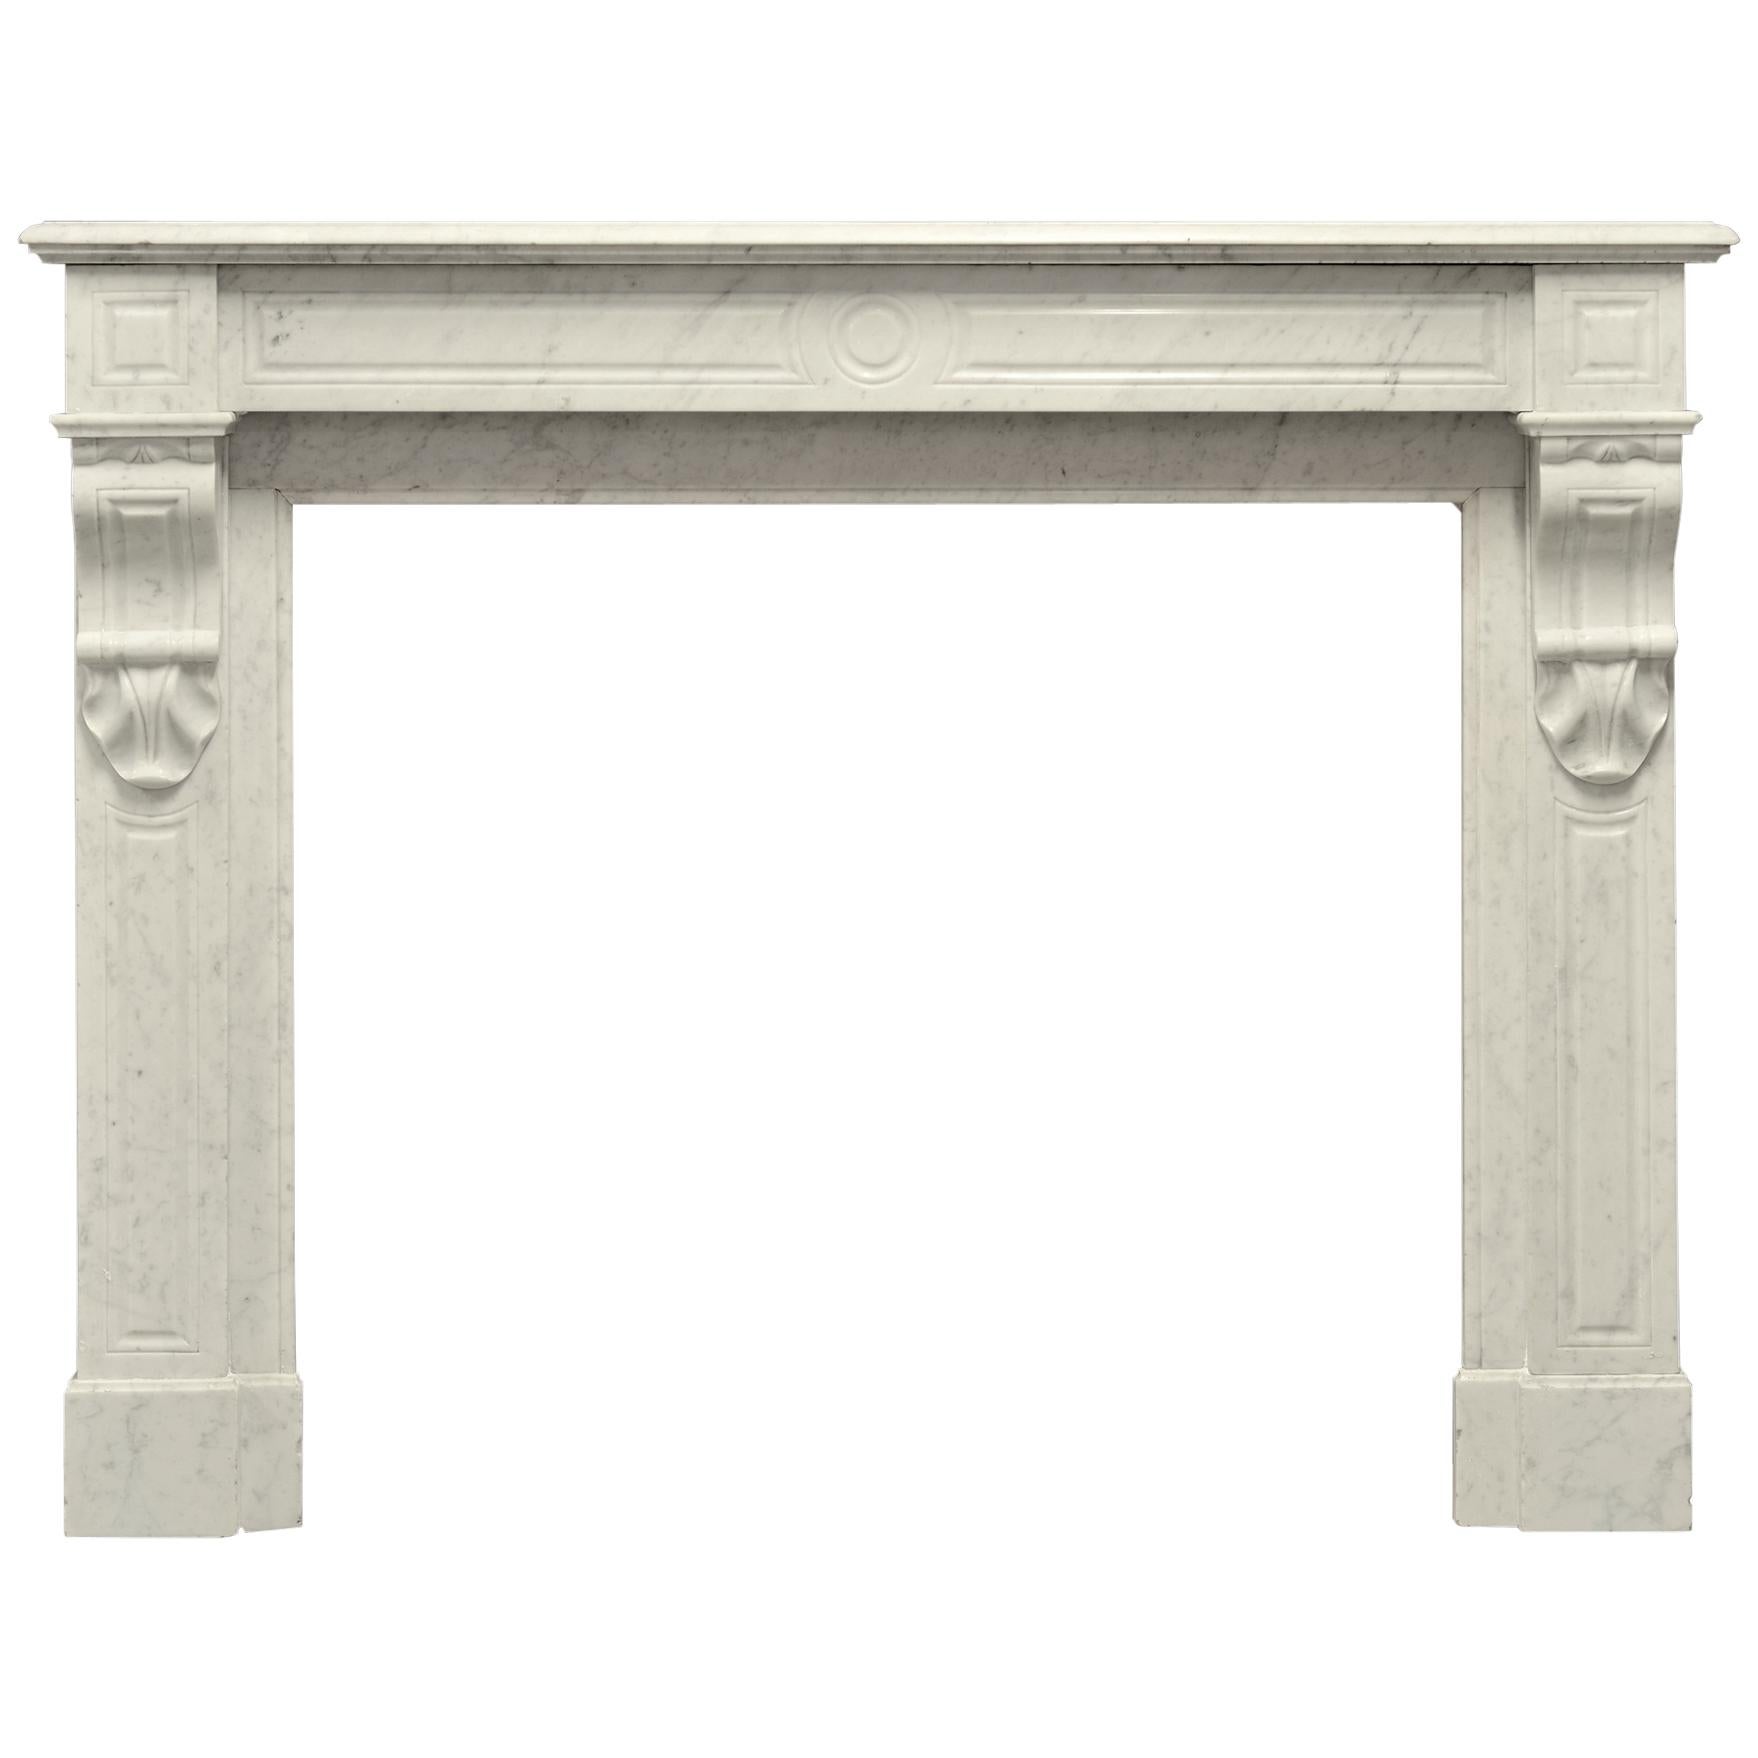 Antique Fireplace in White Marble